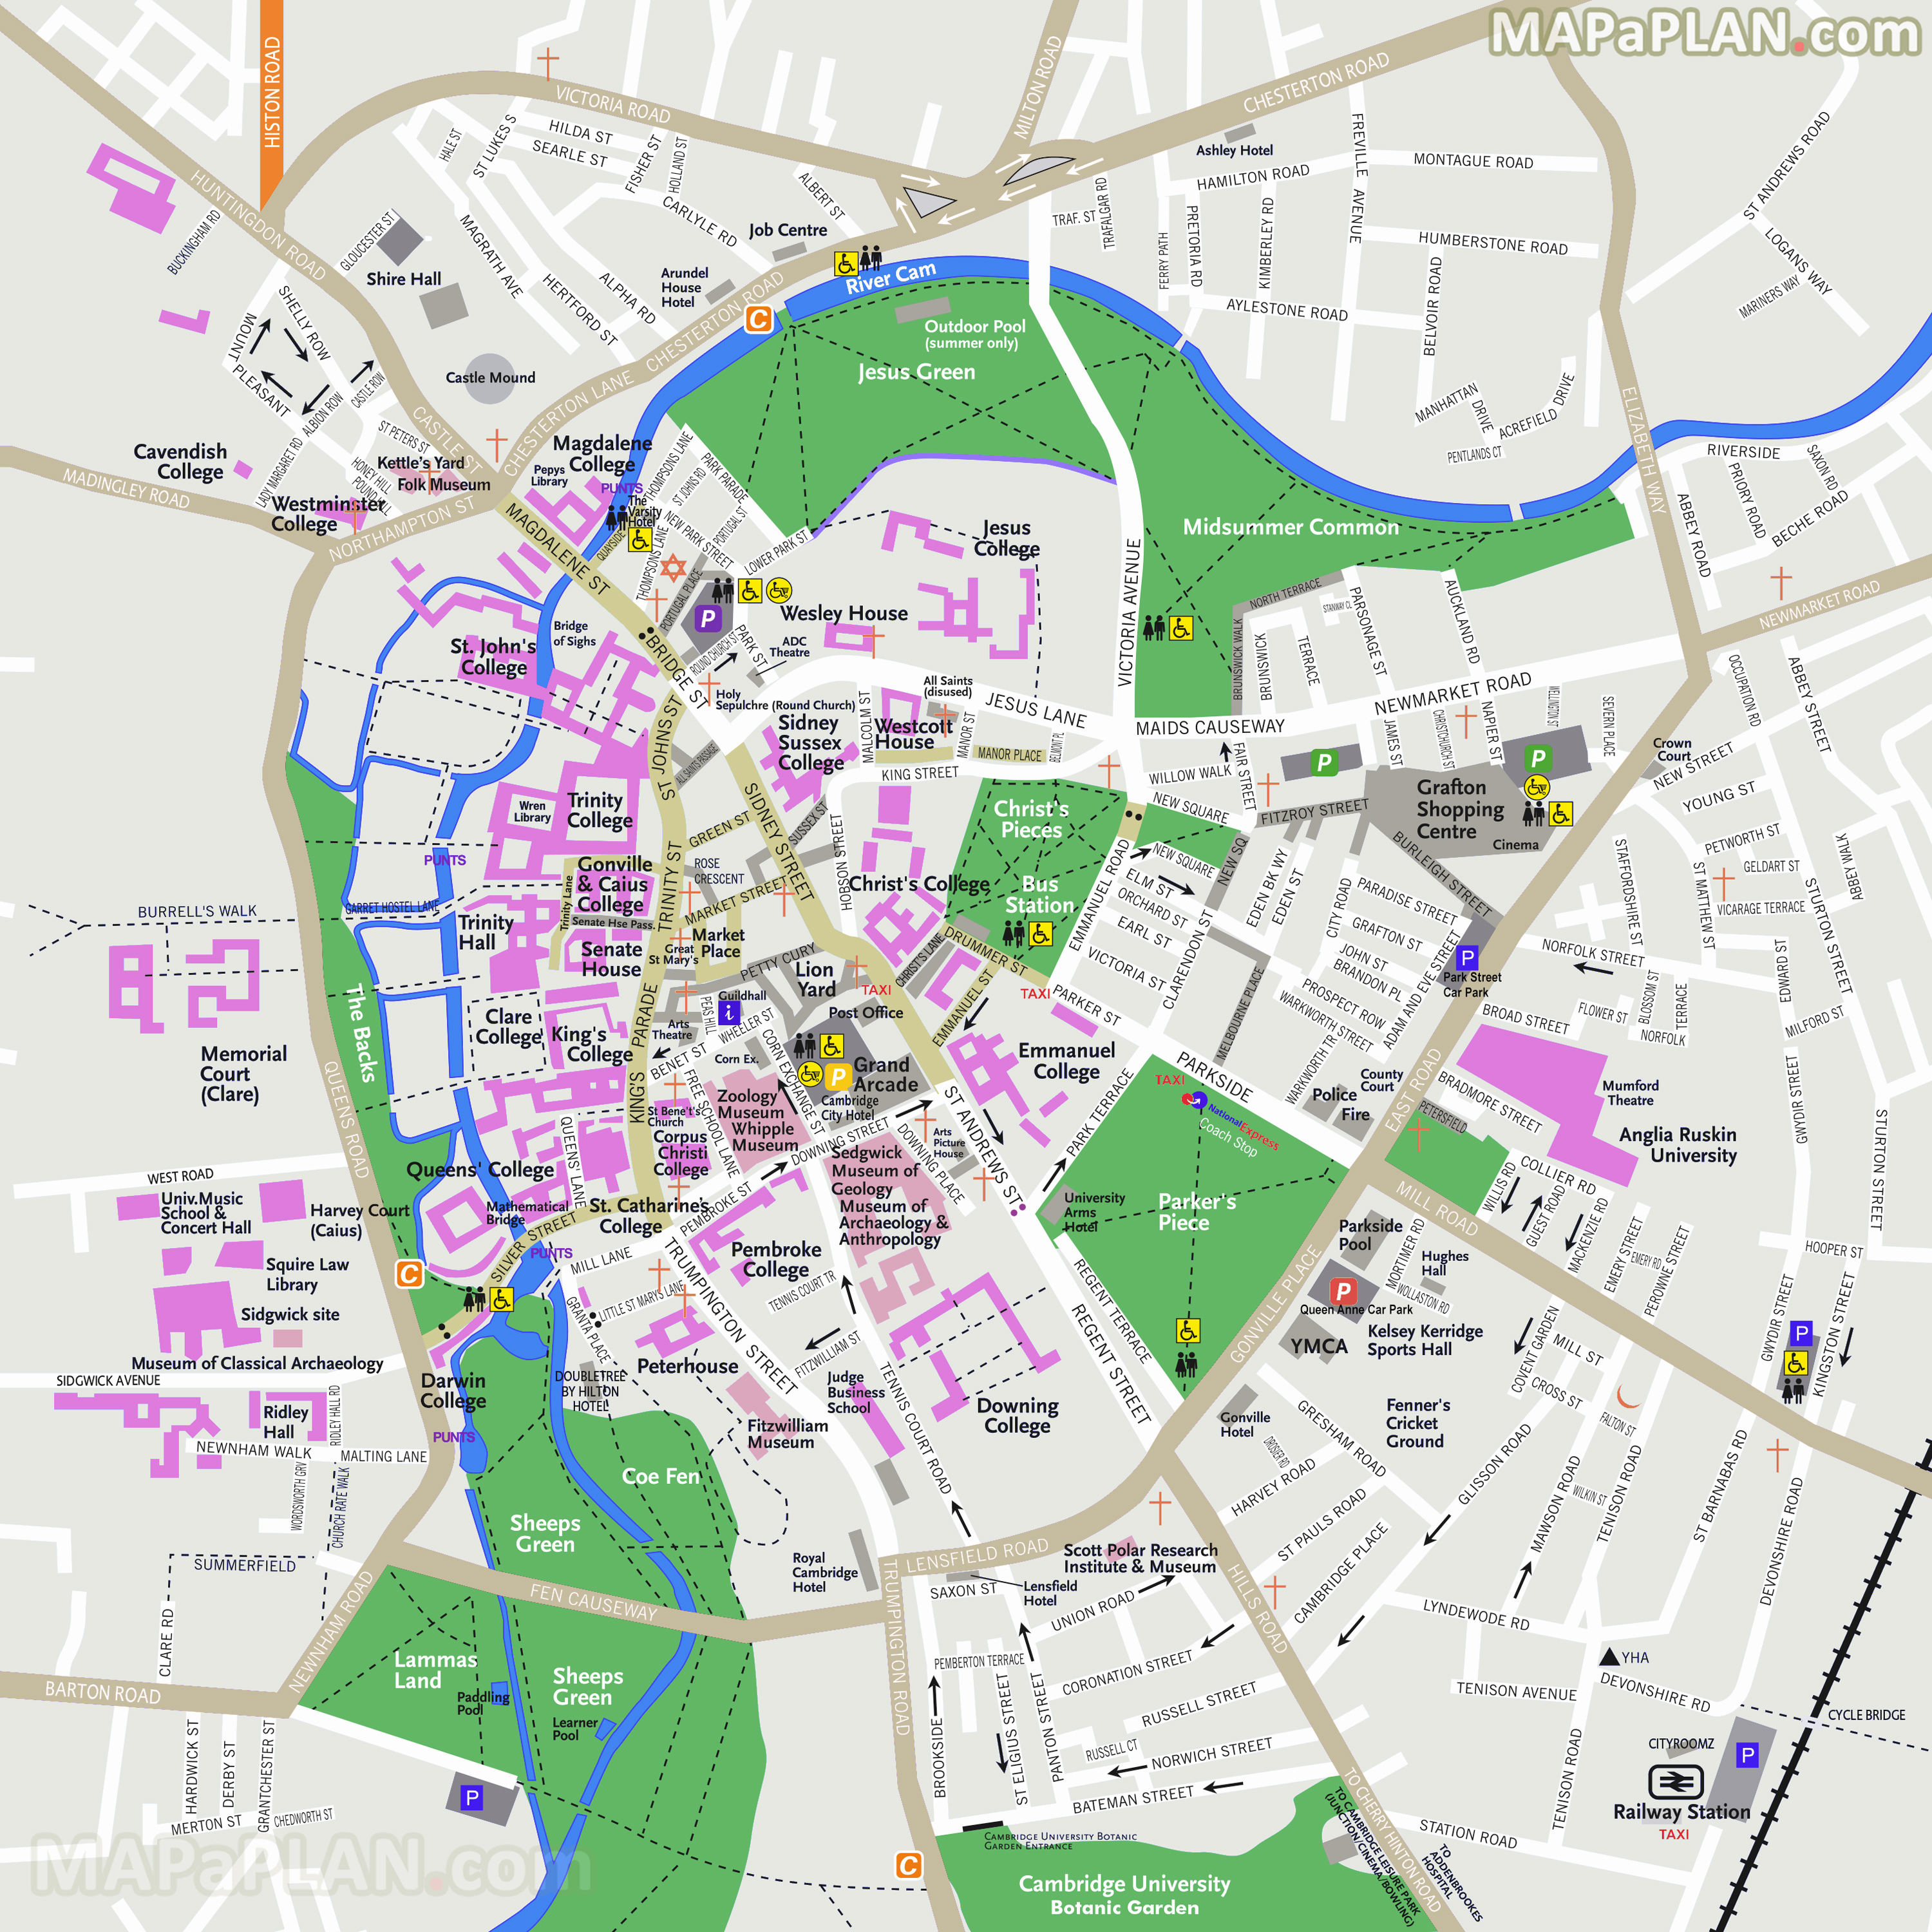 Interesting sites best museums top colleges popular shopping centres in two days Cambridge top tourist attractions map